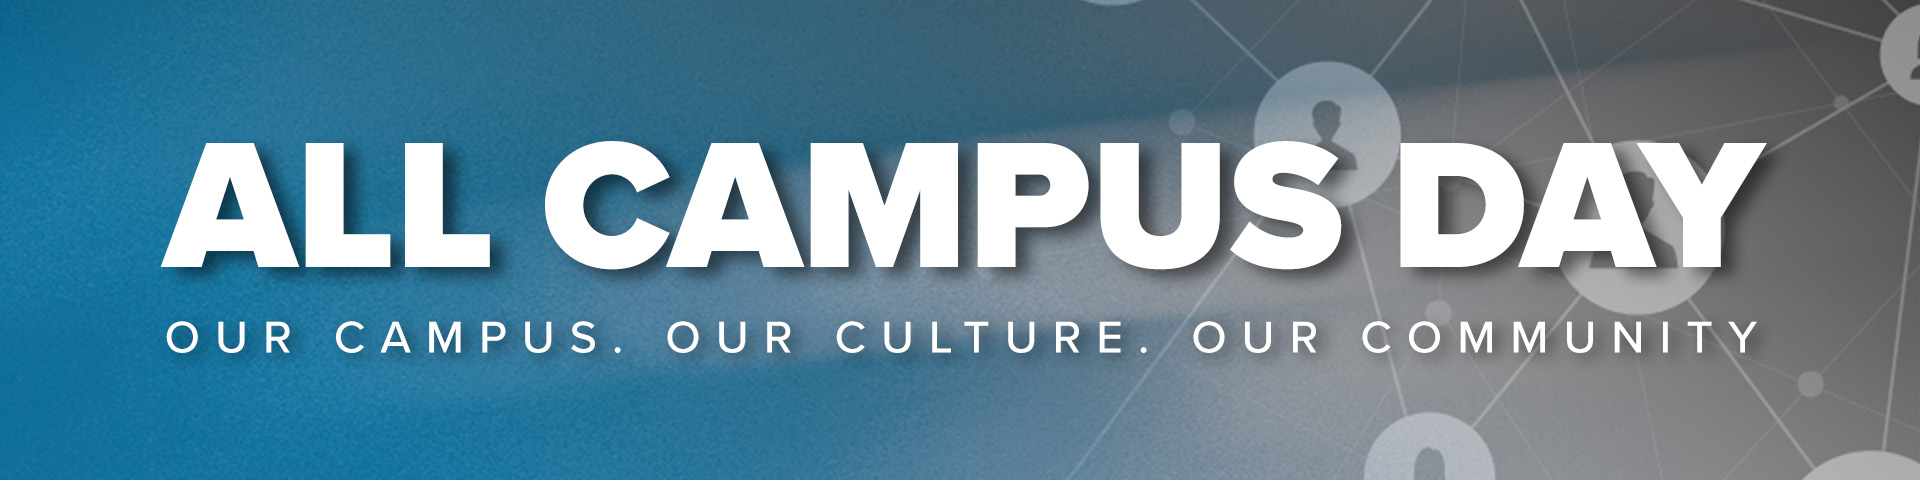 Our Campus, Our Culture, Our Community. Professional Development Series